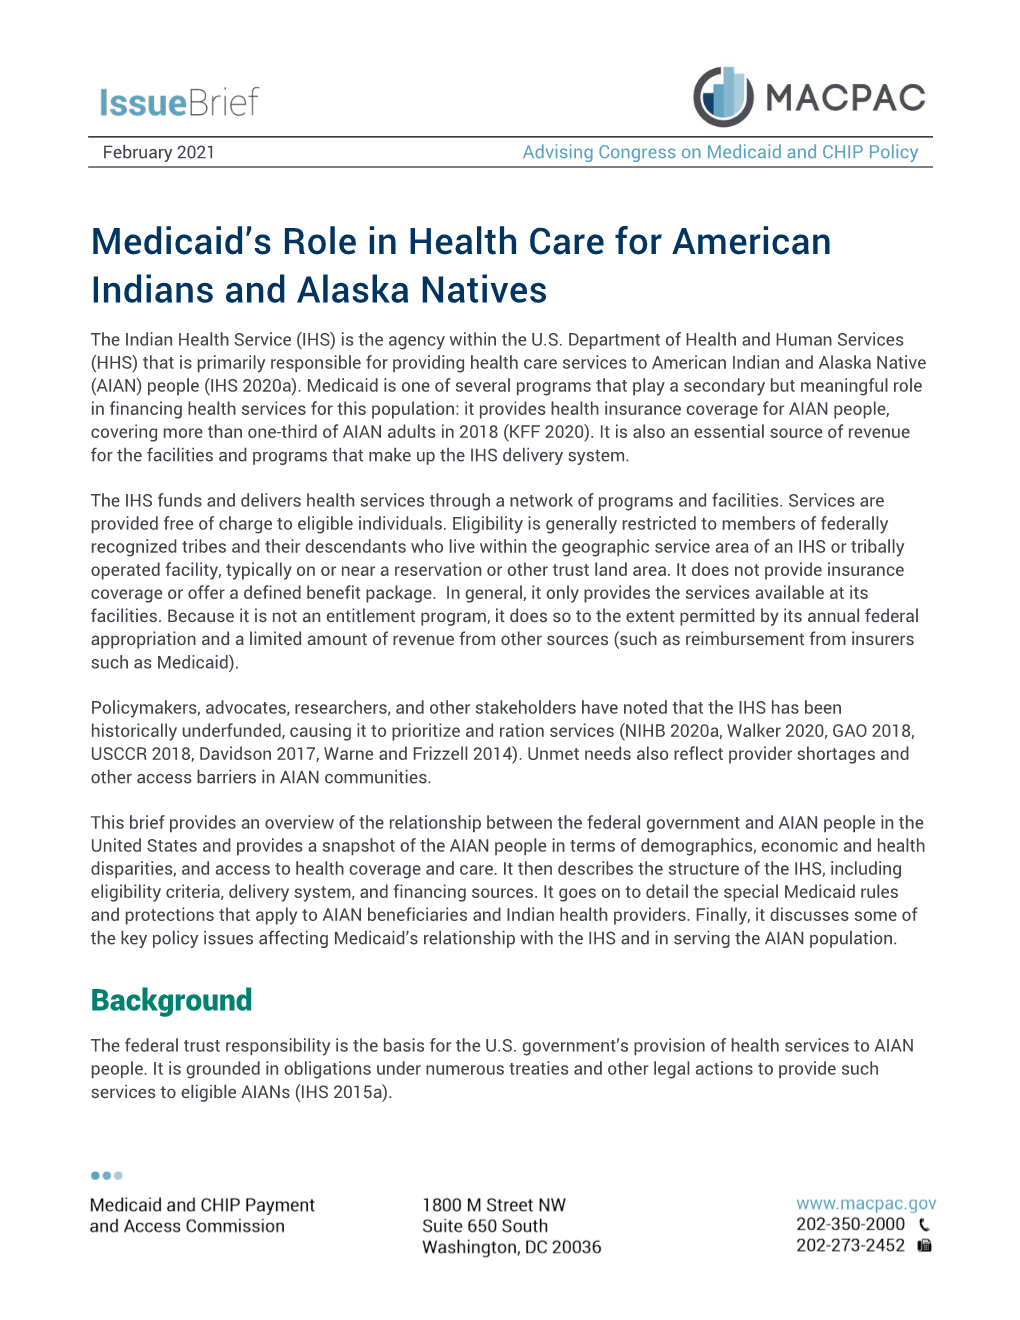 Medicaid's Role in Health Care for American Indians and Alaska Natives